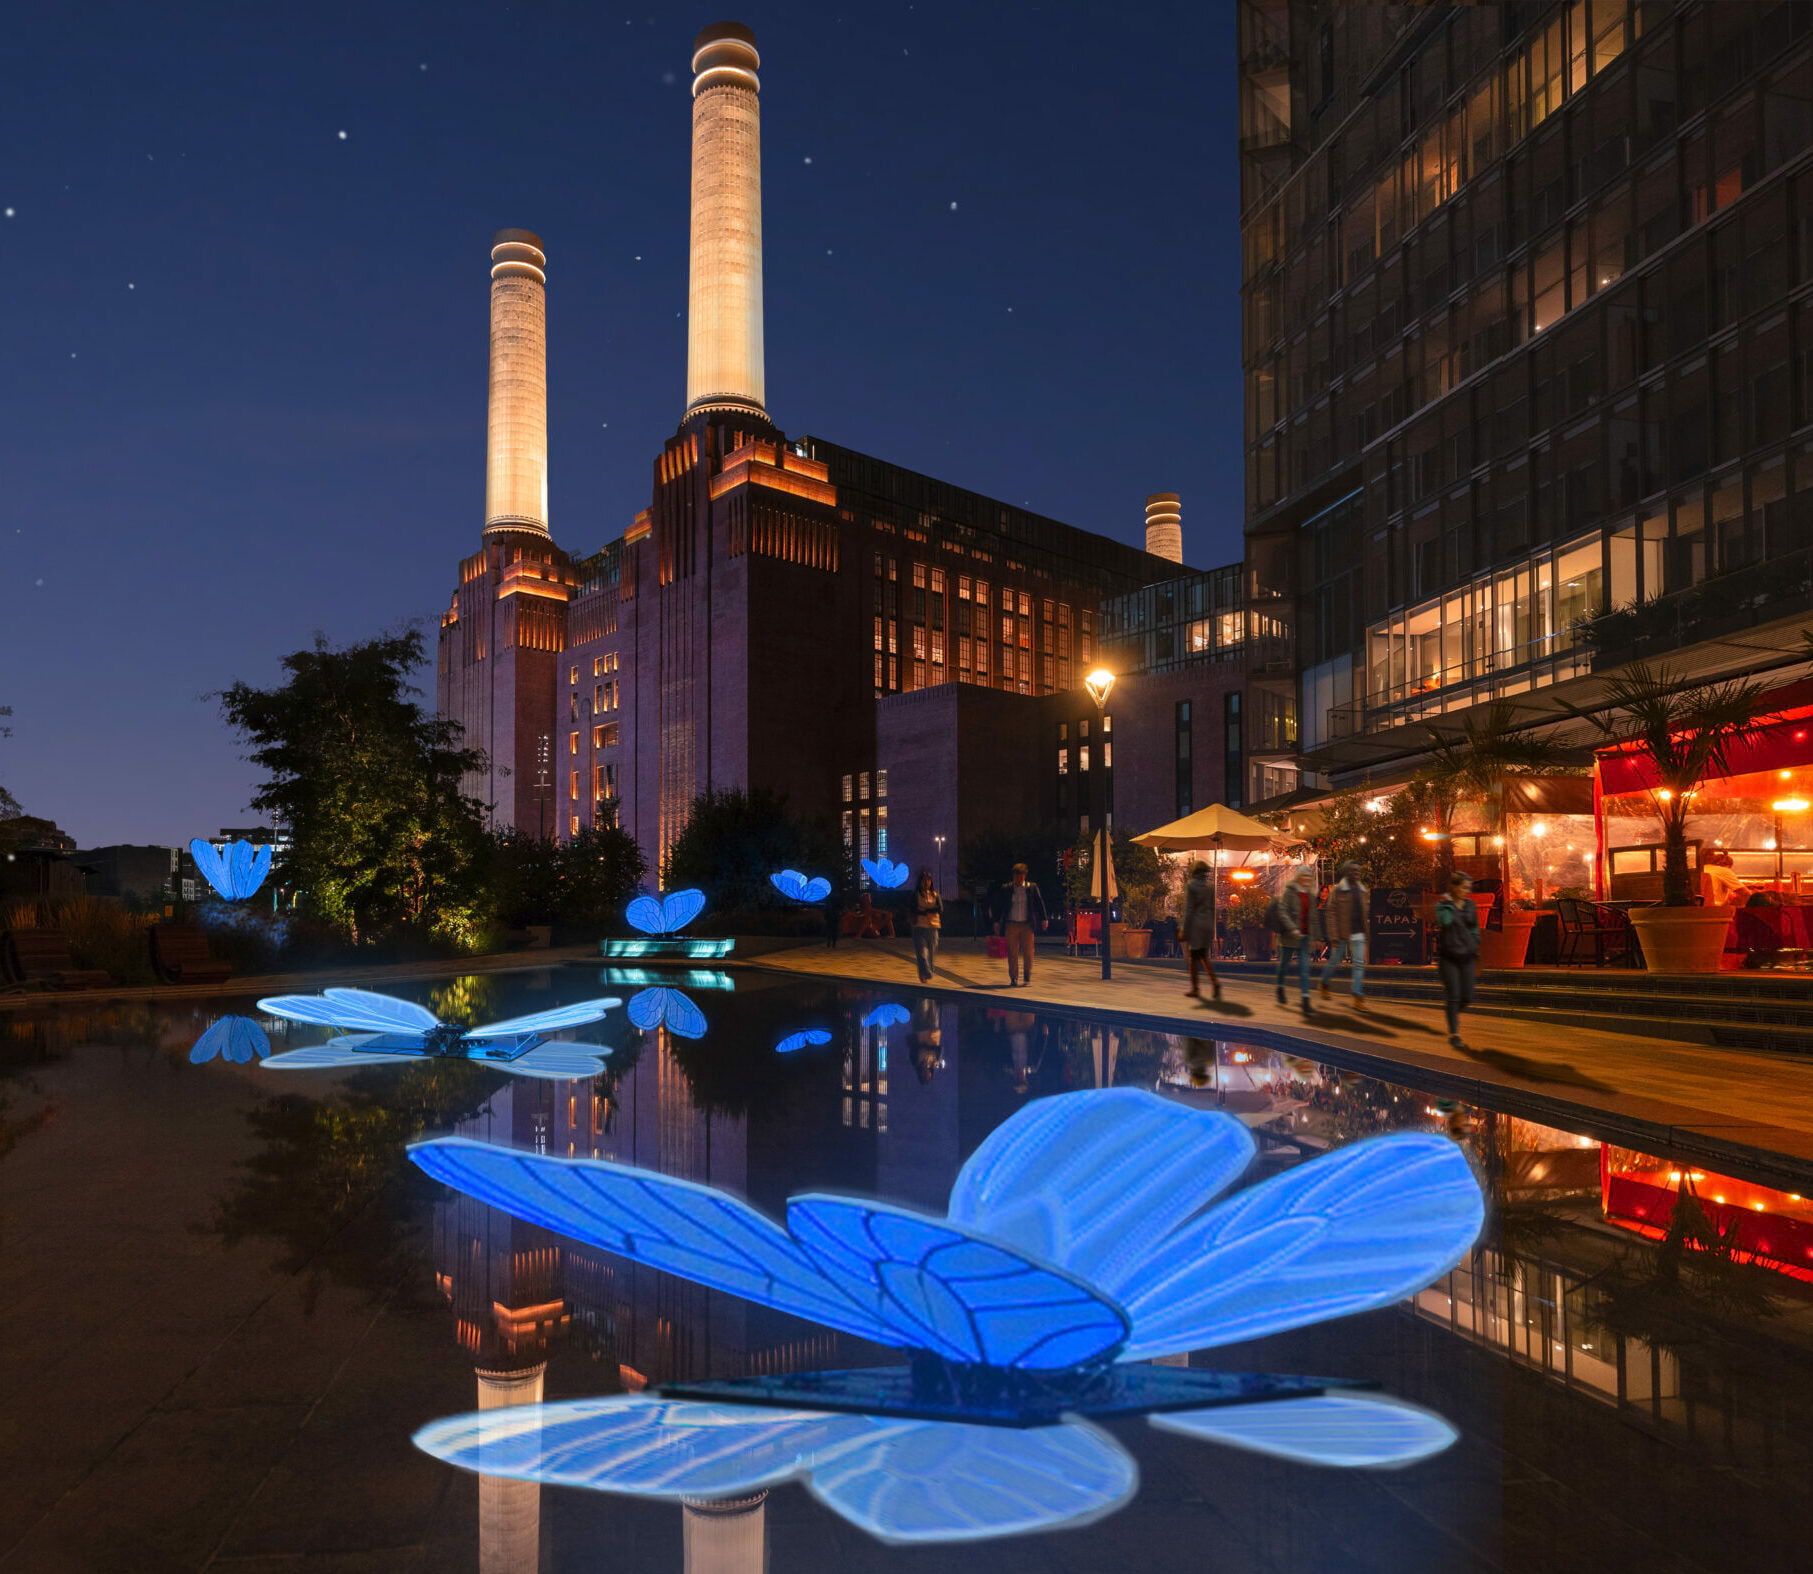 Battersea Power Station is taking the winter lights baton from Canary Wharf